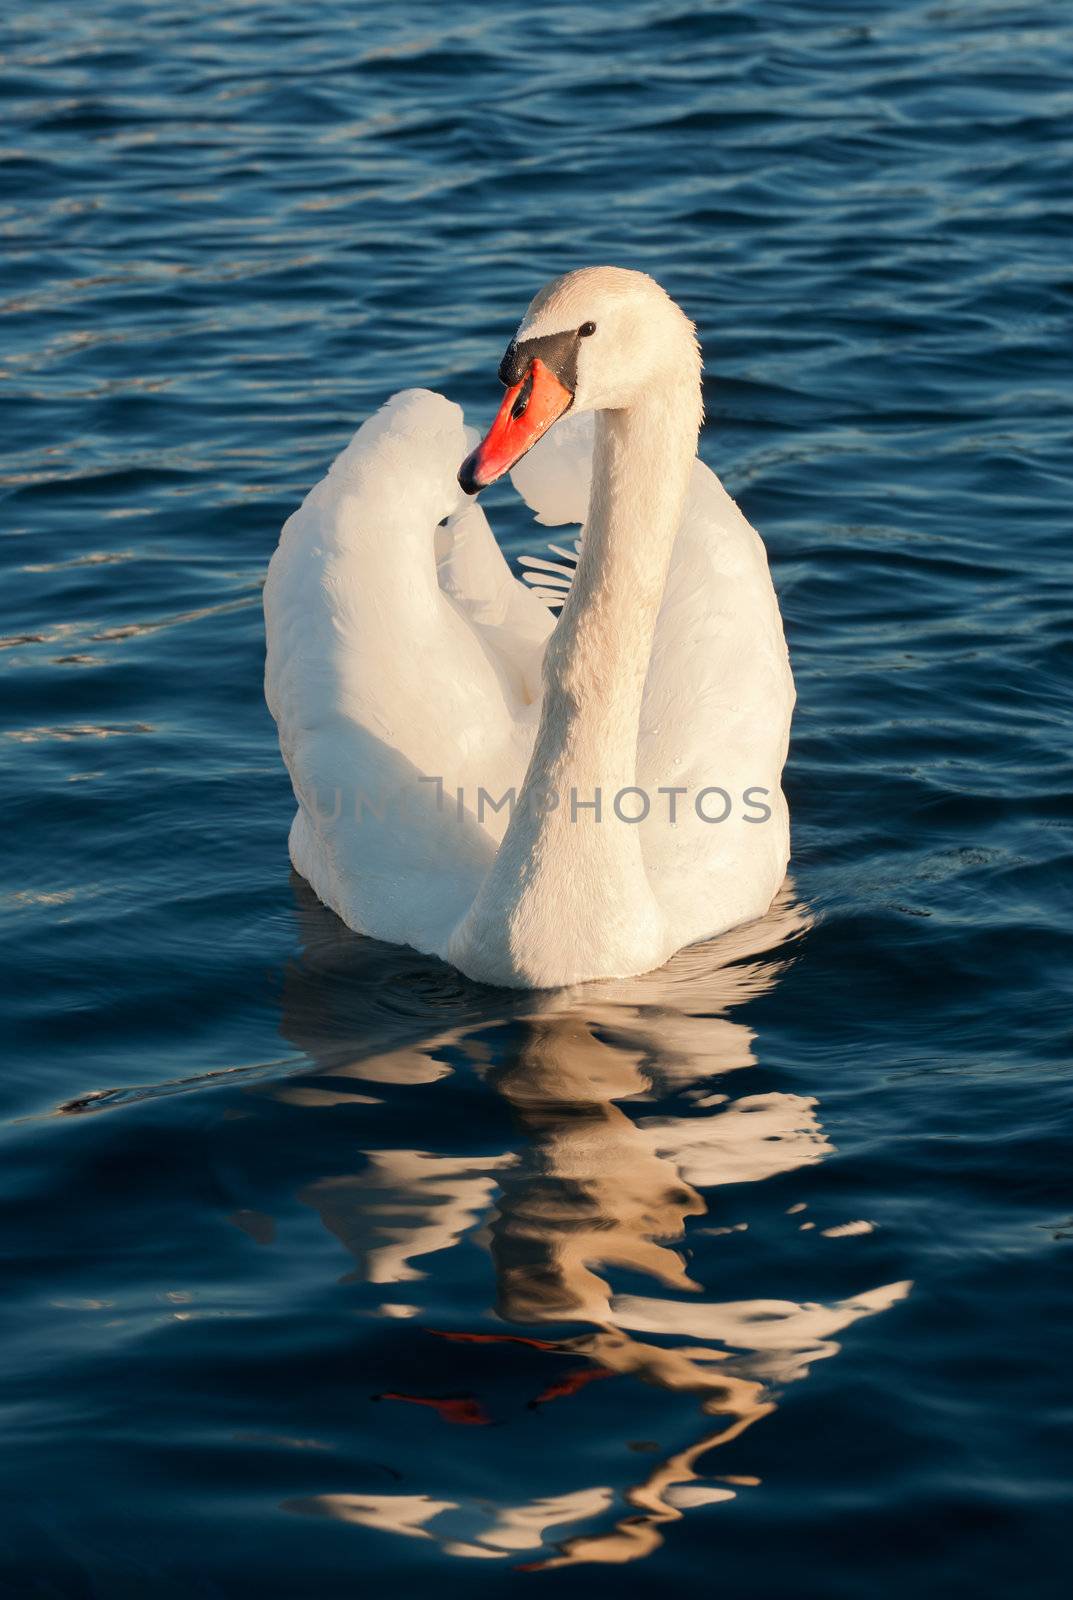 Wild swan portrait. Cygnus olor An adult in threat posture on a tranquil water